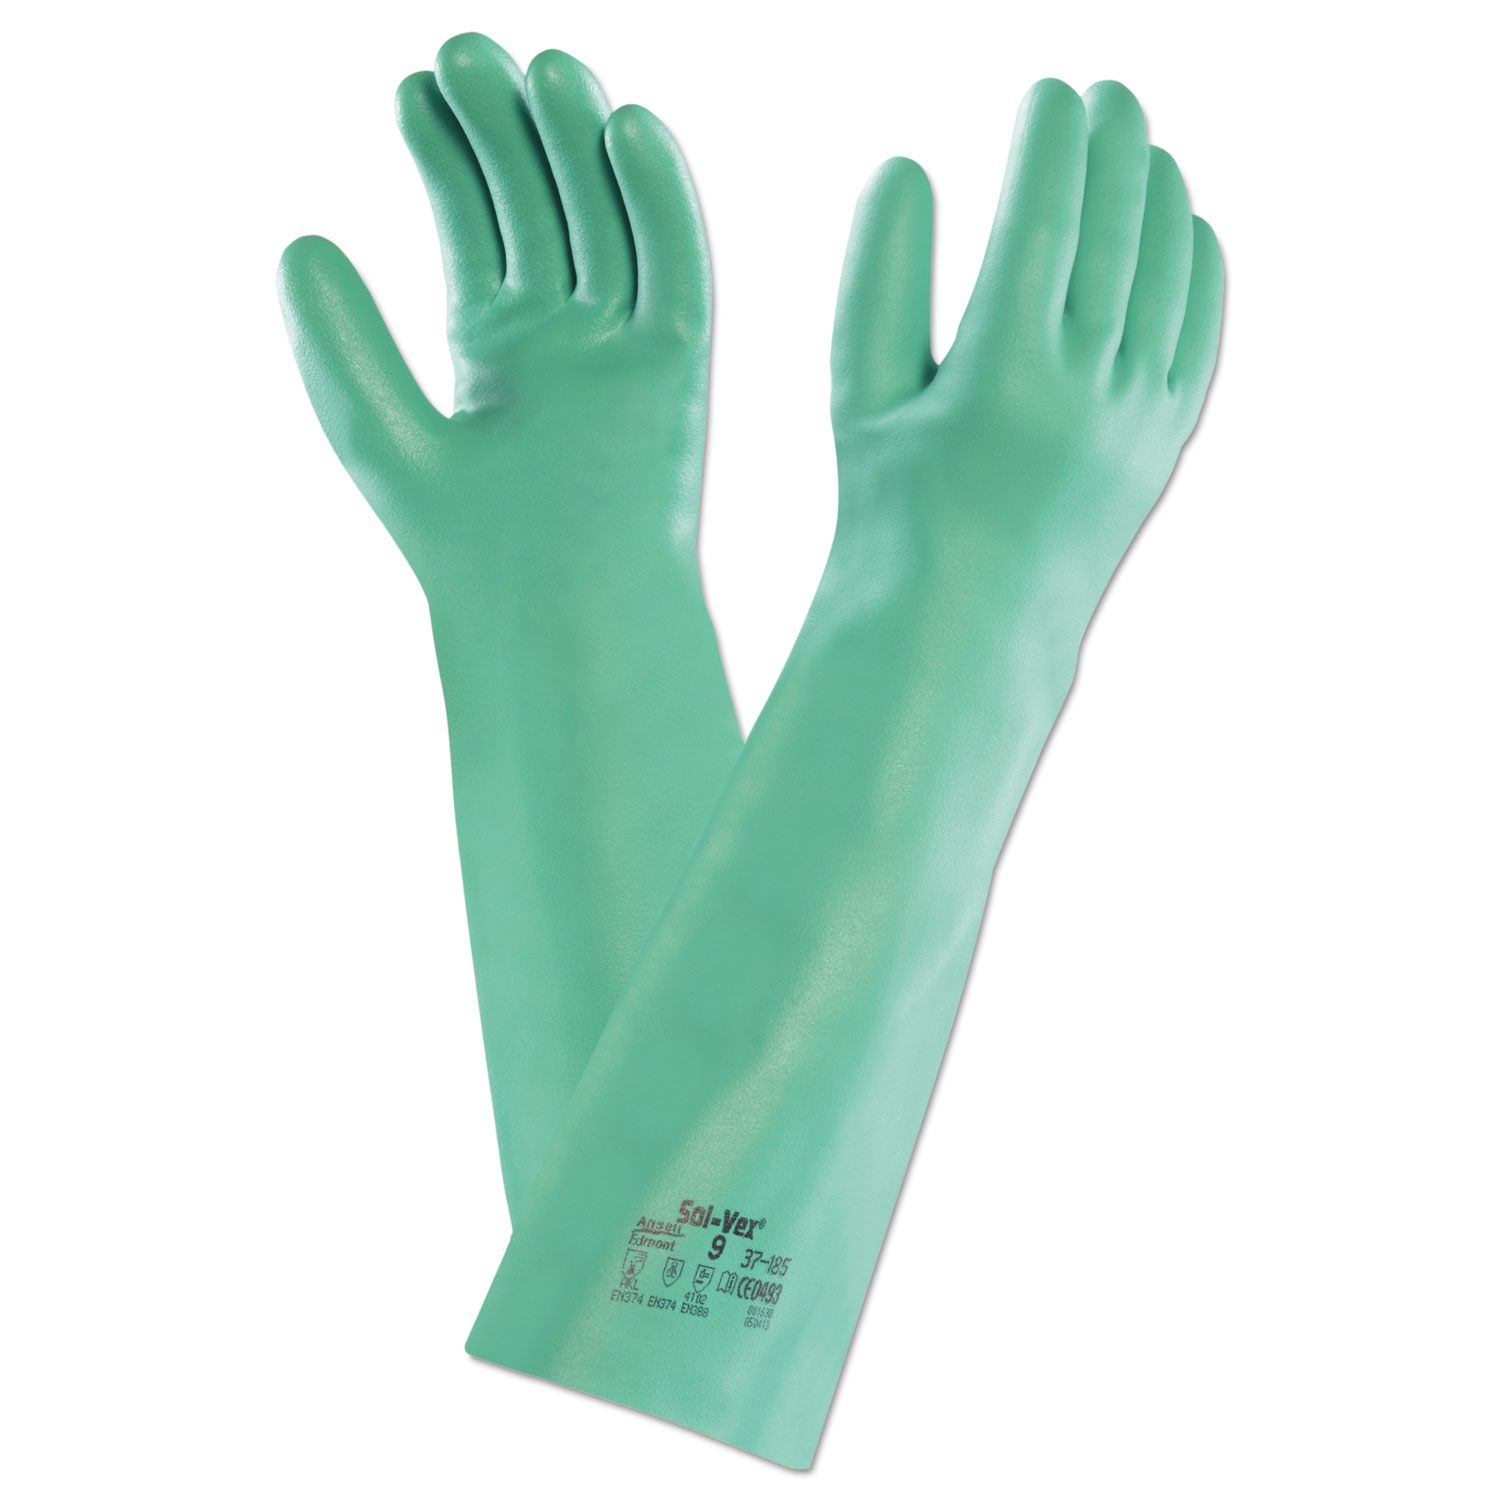  AnsellPro 102945 Sol-Vex Nitrile Gloves, Size 9 (ANS371859) 